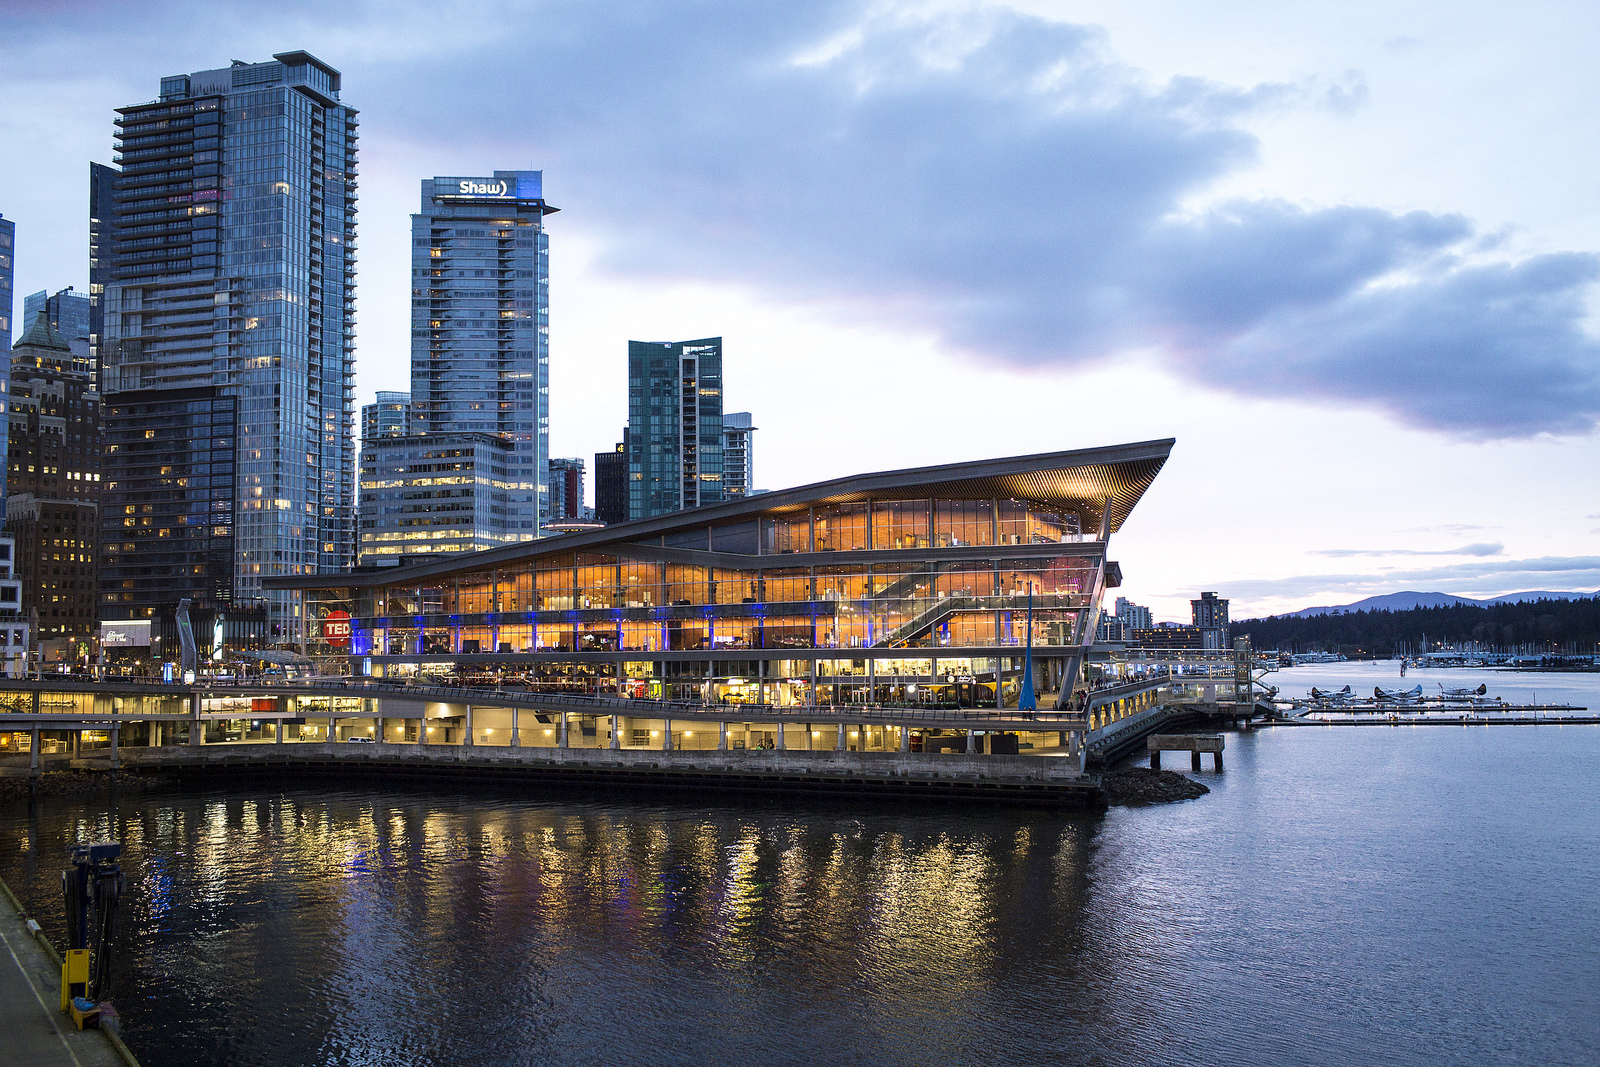 The Vancouver Convention Centre, where TED2015 is being held, sits right on the harbor. Photo: TED